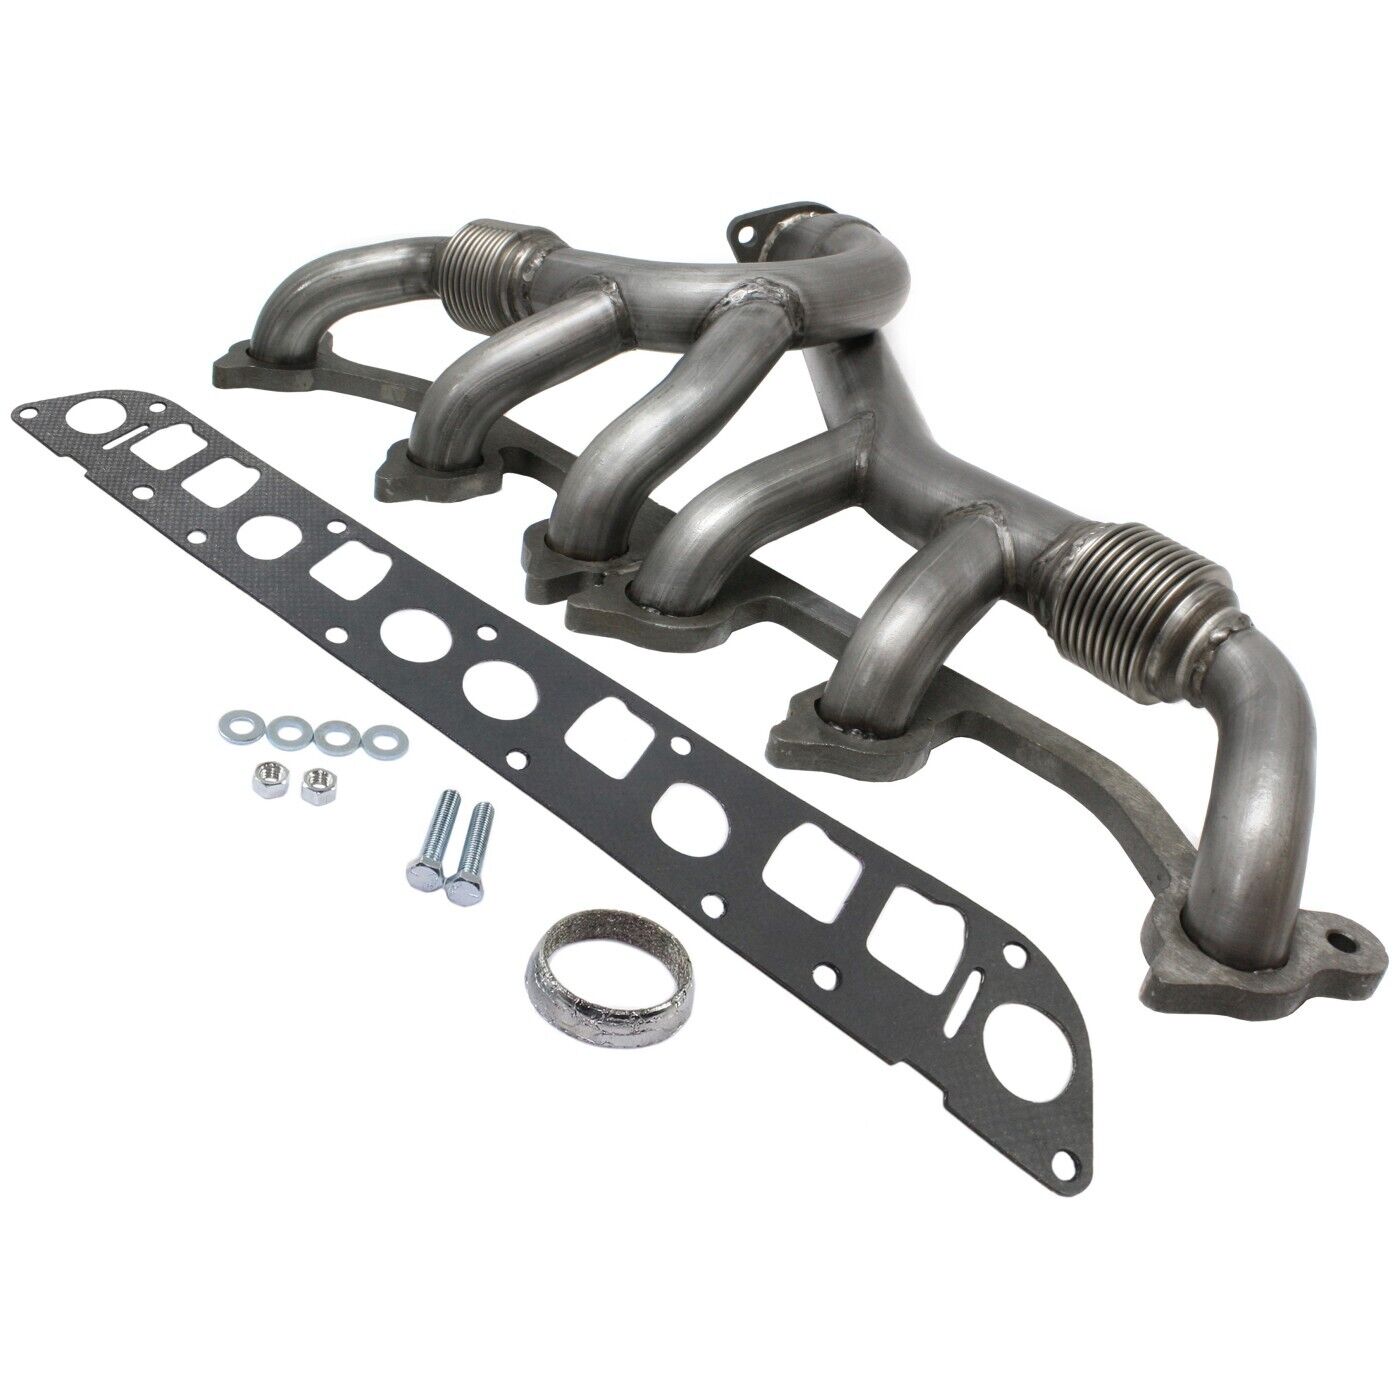 For Jeep Grand Cherokee Wrangler 4.0L V6 Exhaust Manifold Stainless Steel NEW